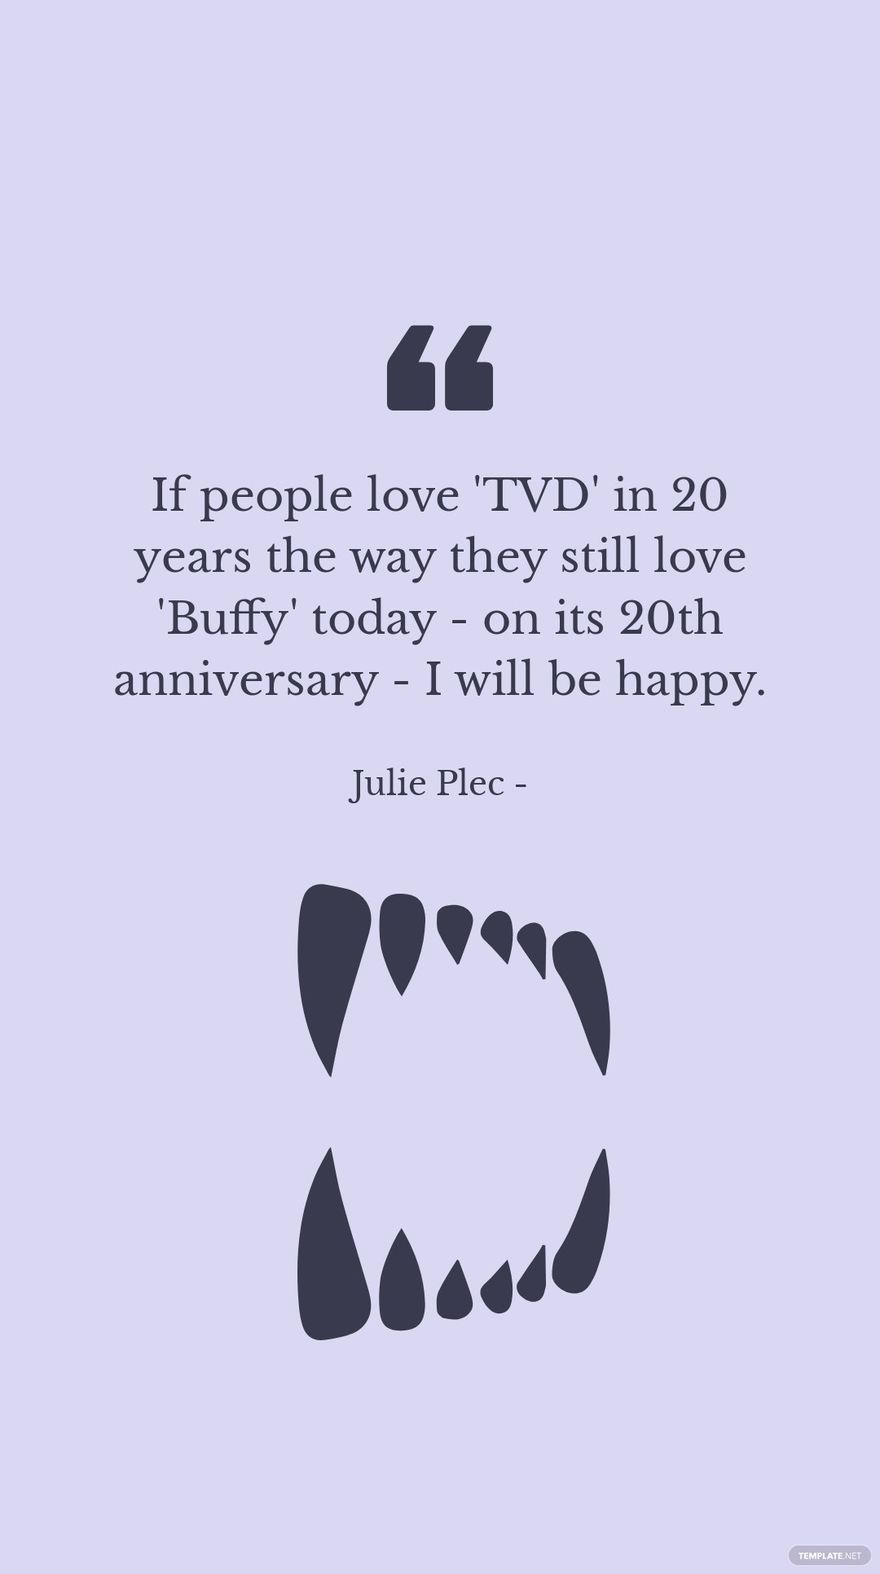 Julie Plec - If people love 'TVD' in 20 years the way they still love 'Buffy' today - on its 20th anniversary - I will be happy.